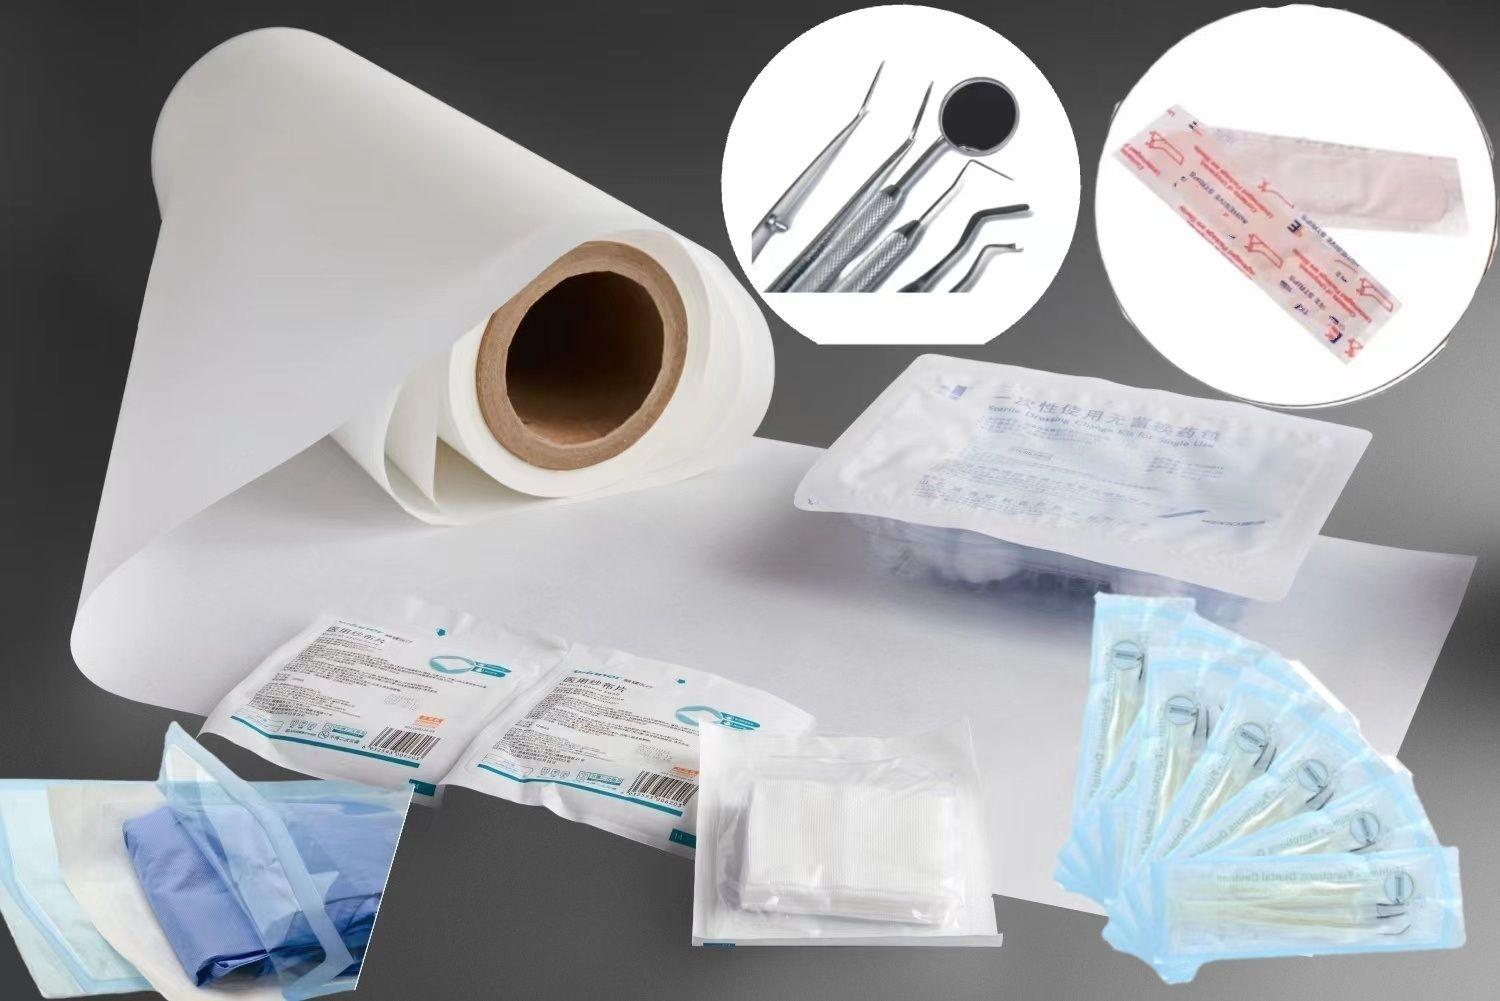 A grid of various tyvek medical packaging on a gray background